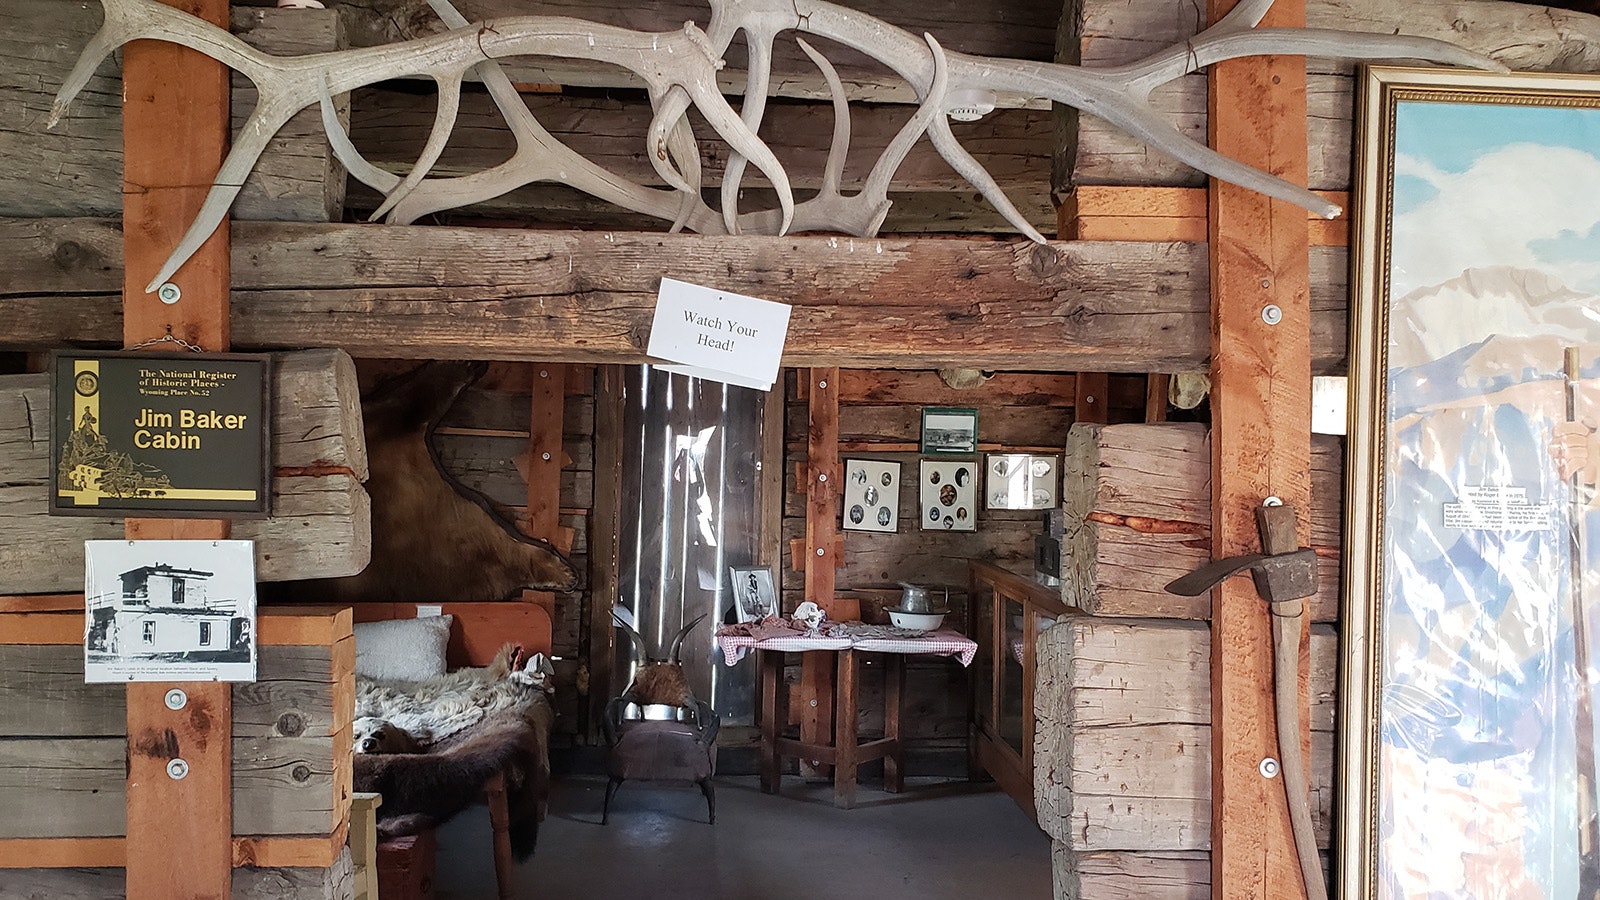 The back bedroom of Jim Baker's cabin fortress as it is displayed at the Little Snake River Museum in Savery, Wyoming, an unincorporated community in the Little Snake River Valley.